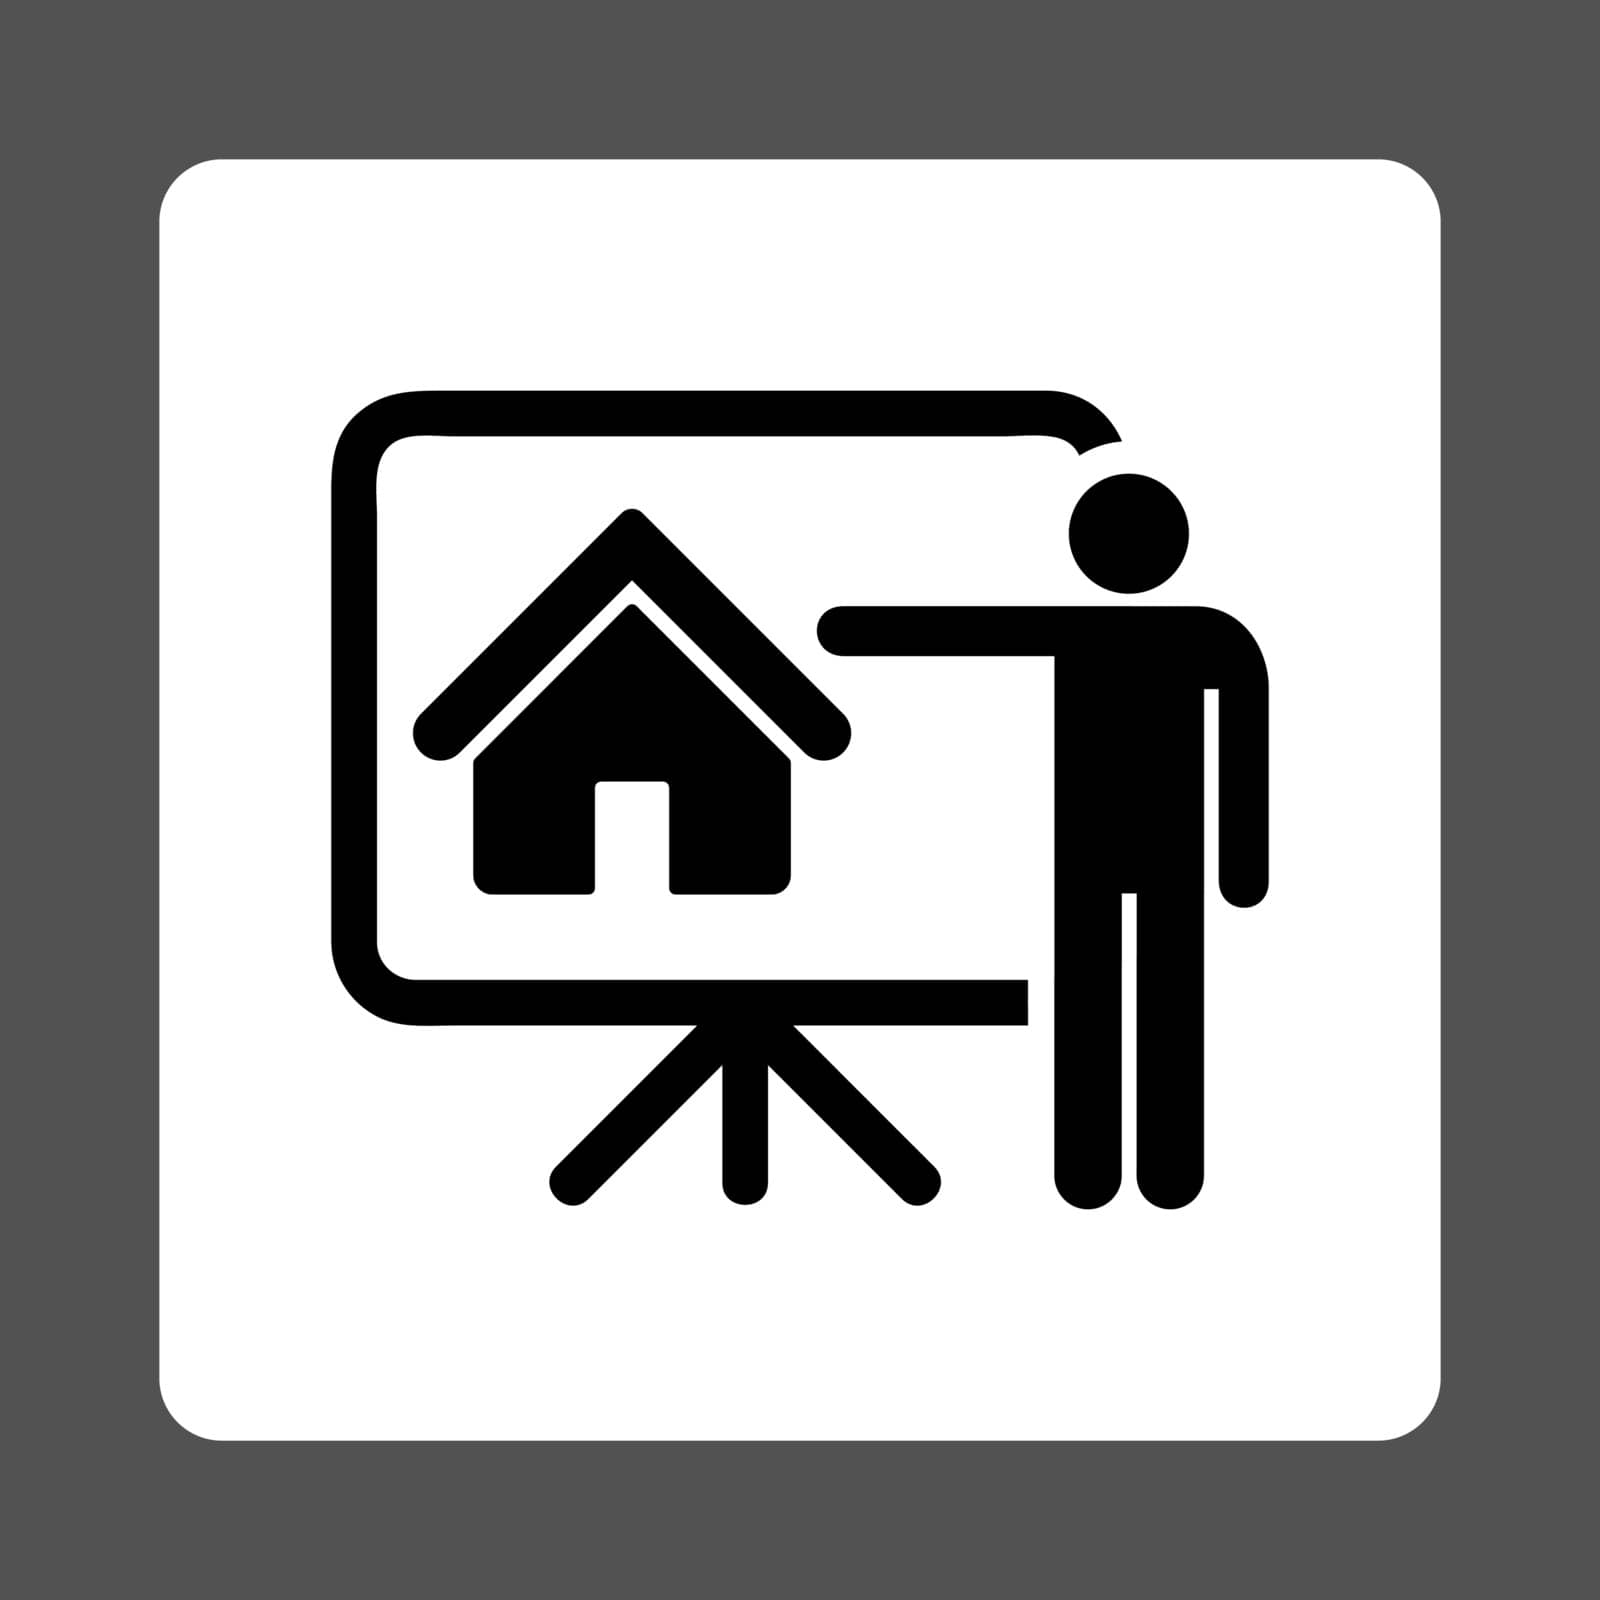 Realtor icon. Vector style is black and white colors, flat rounded square button on a gray background.